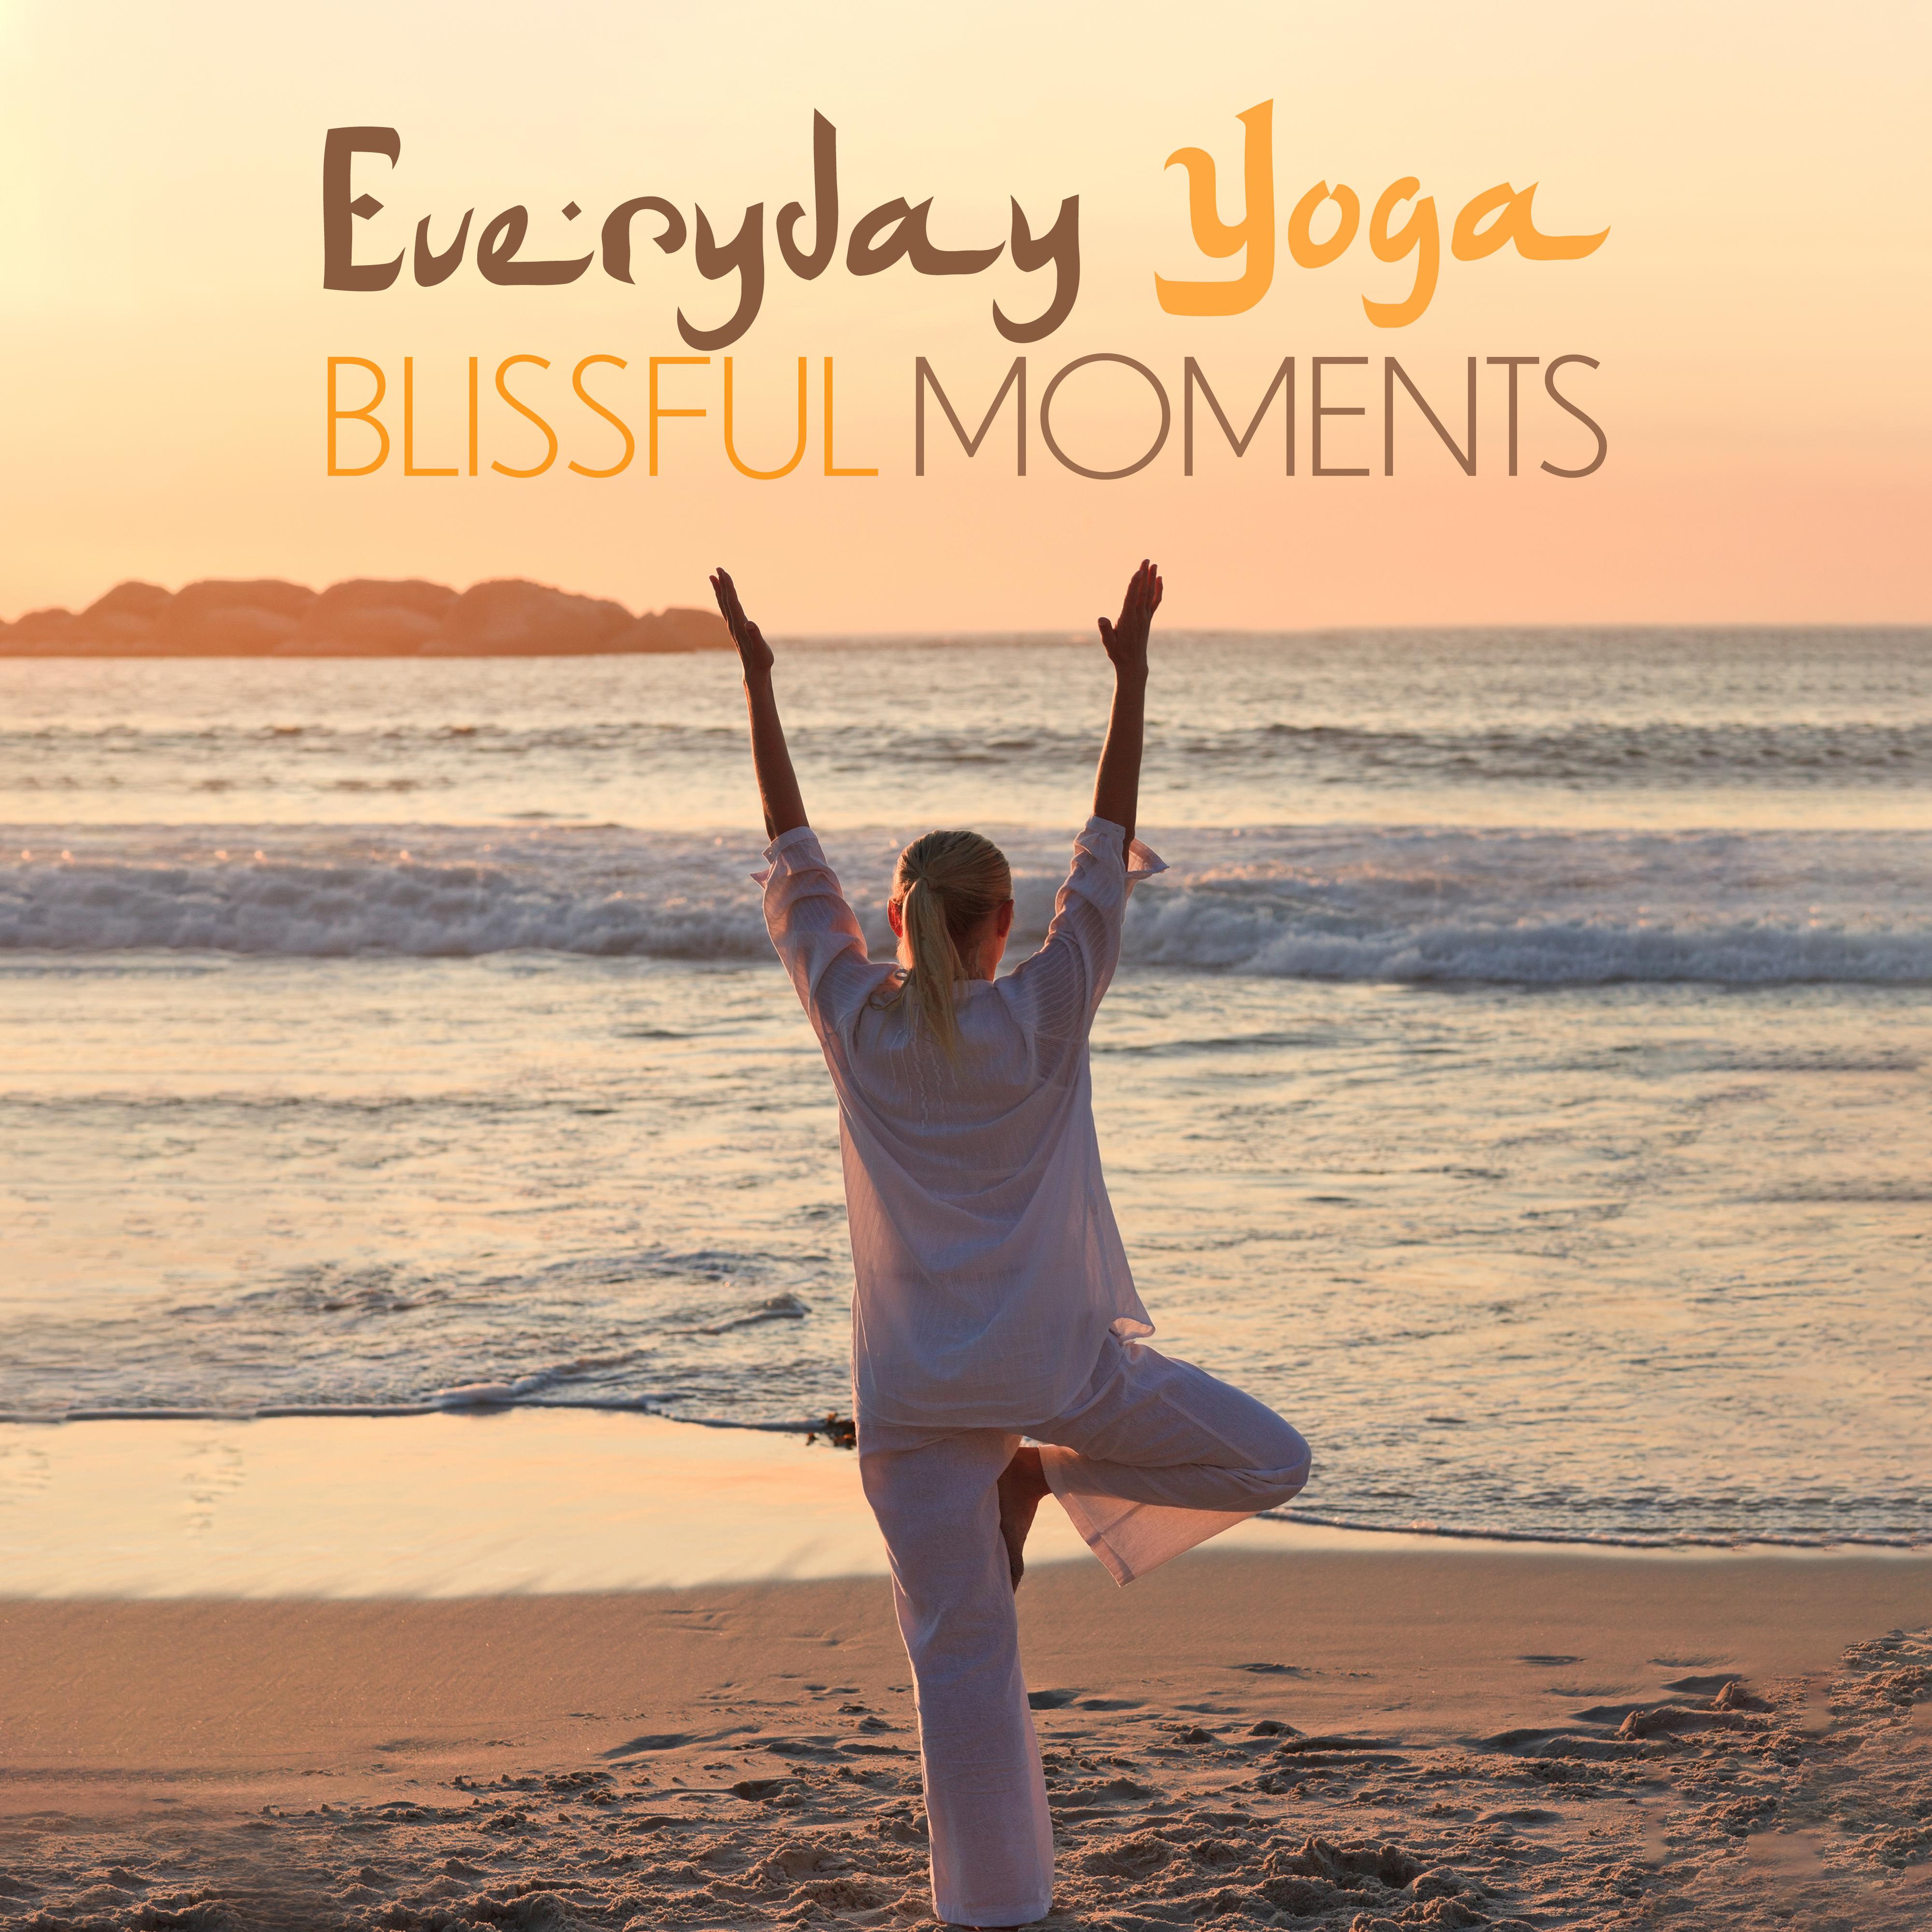 Everyday Yoga Blissful Moments – Compilation of Top 2019 New Age Music for Meditation & Relaxation, Vital Energy Increase, Chakra Healing